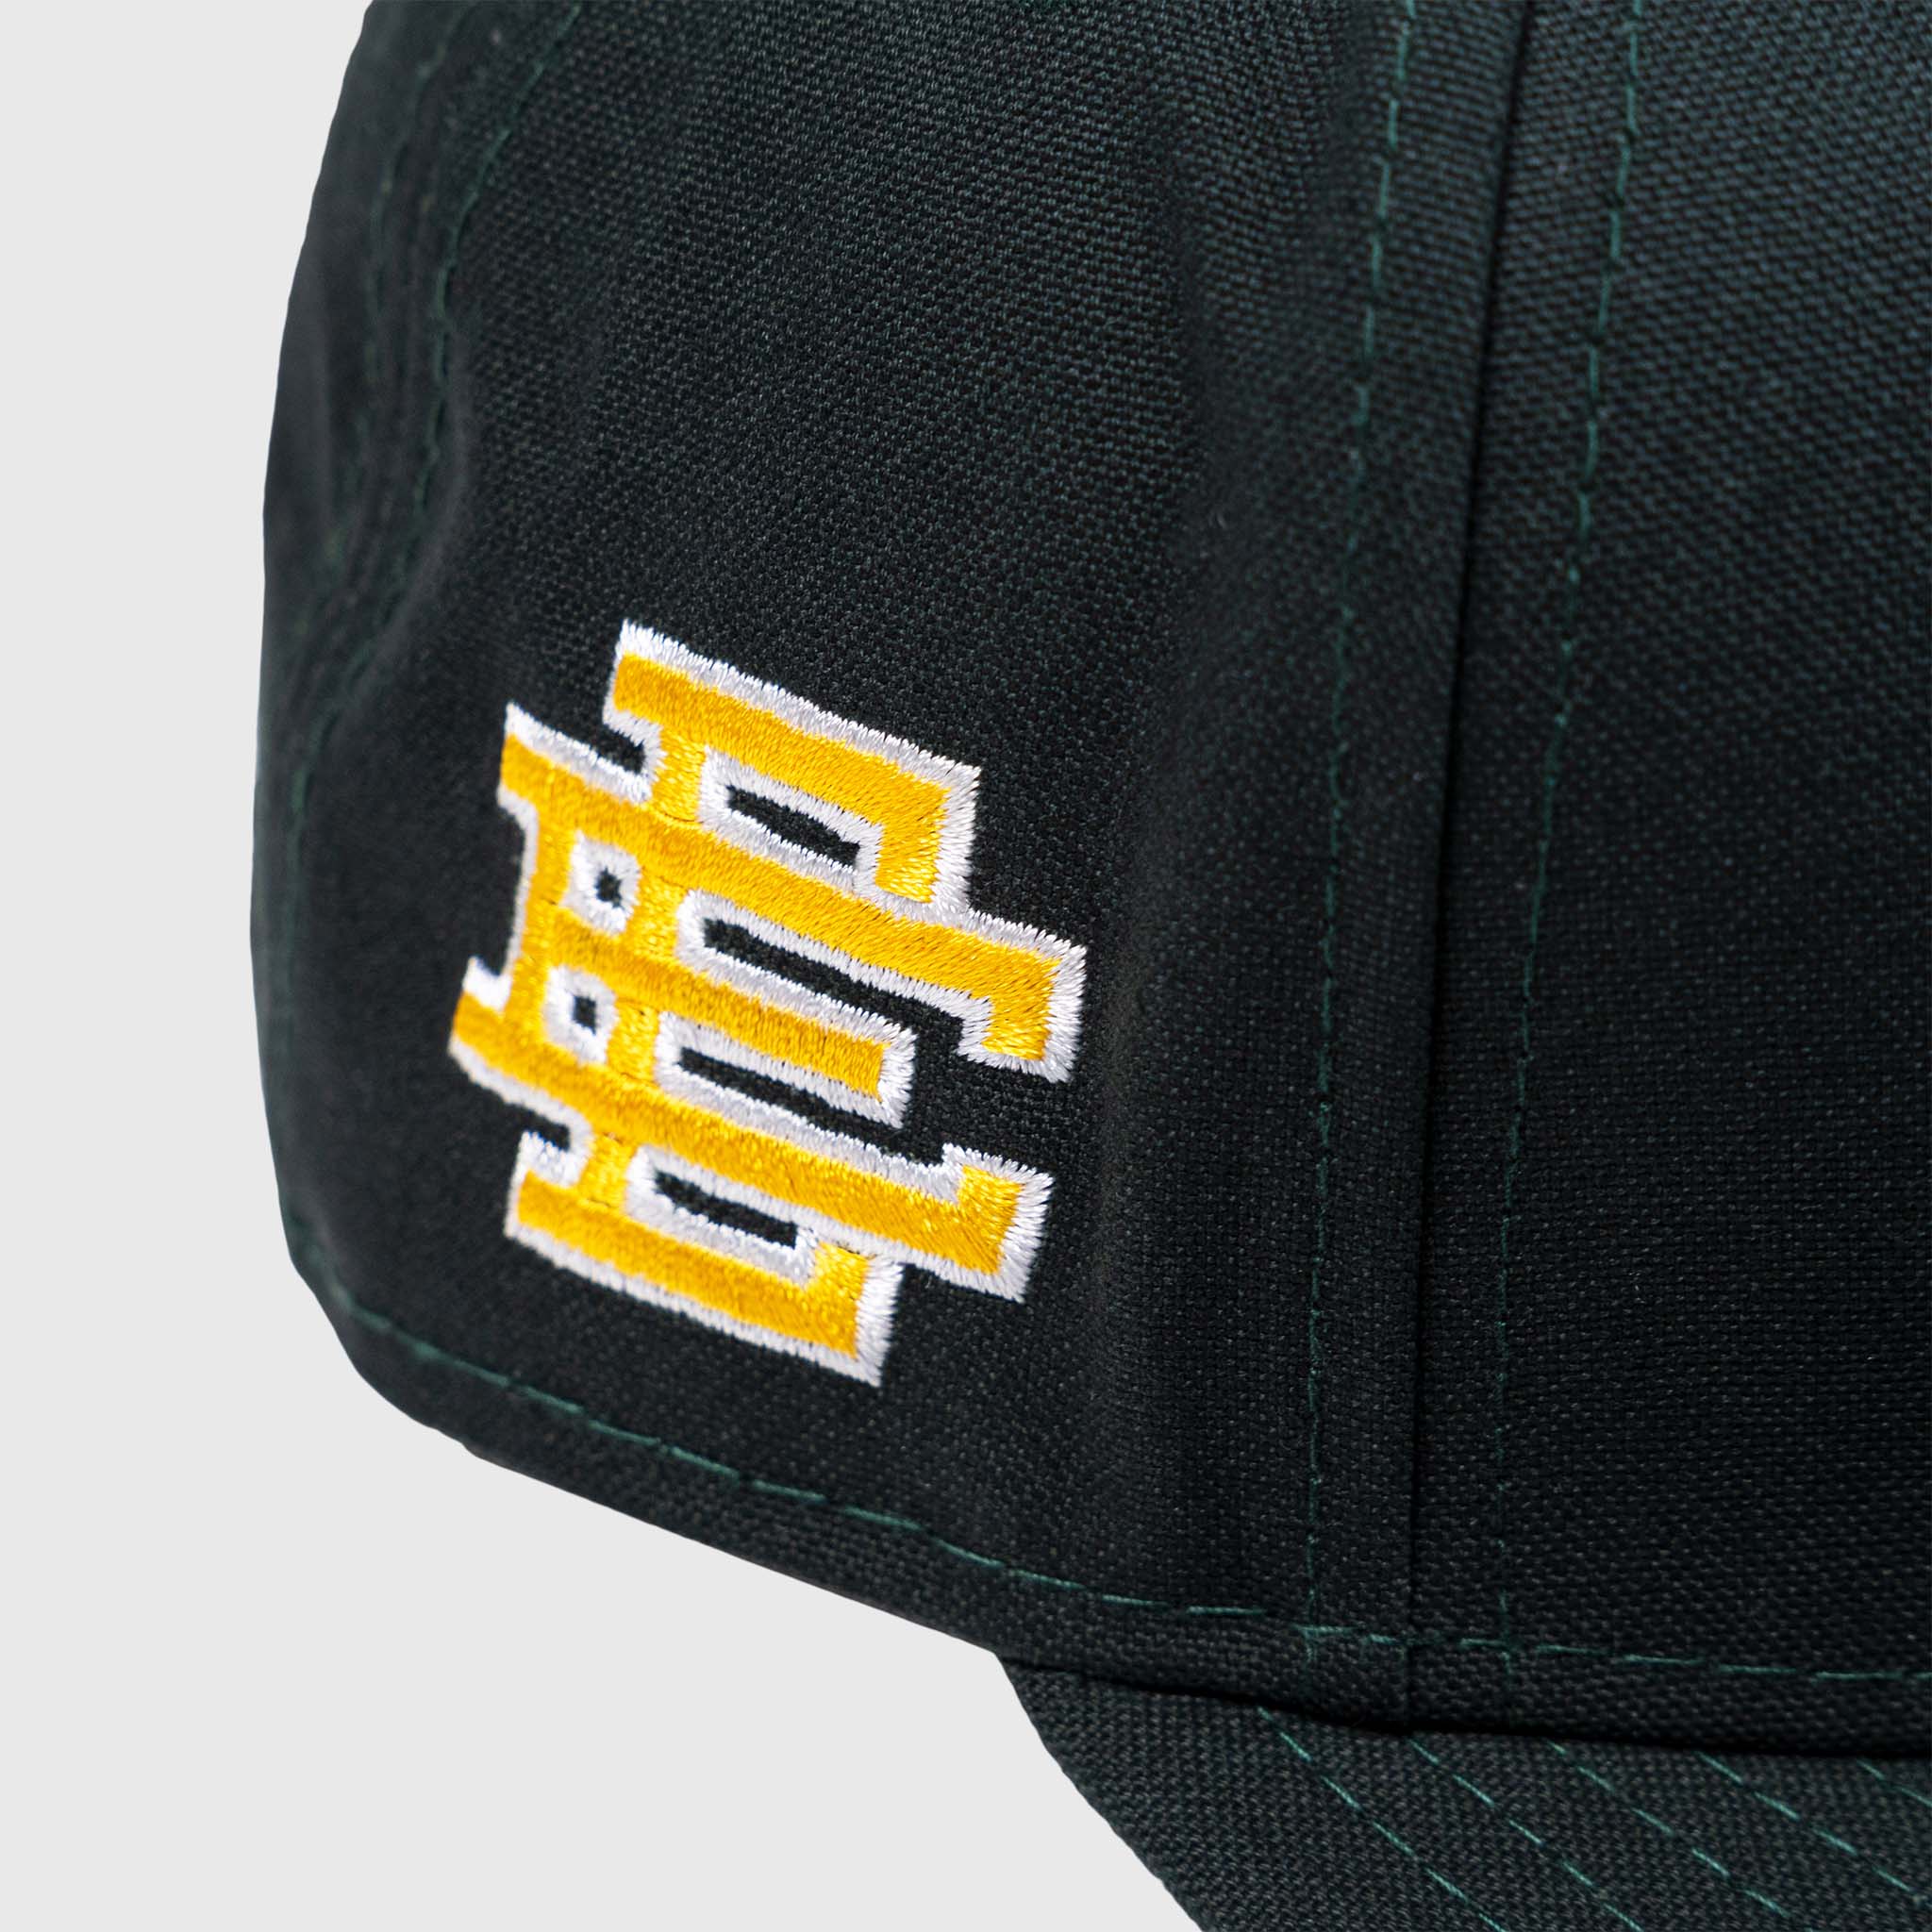 Eric Emanuel x New Era Collection Release Date